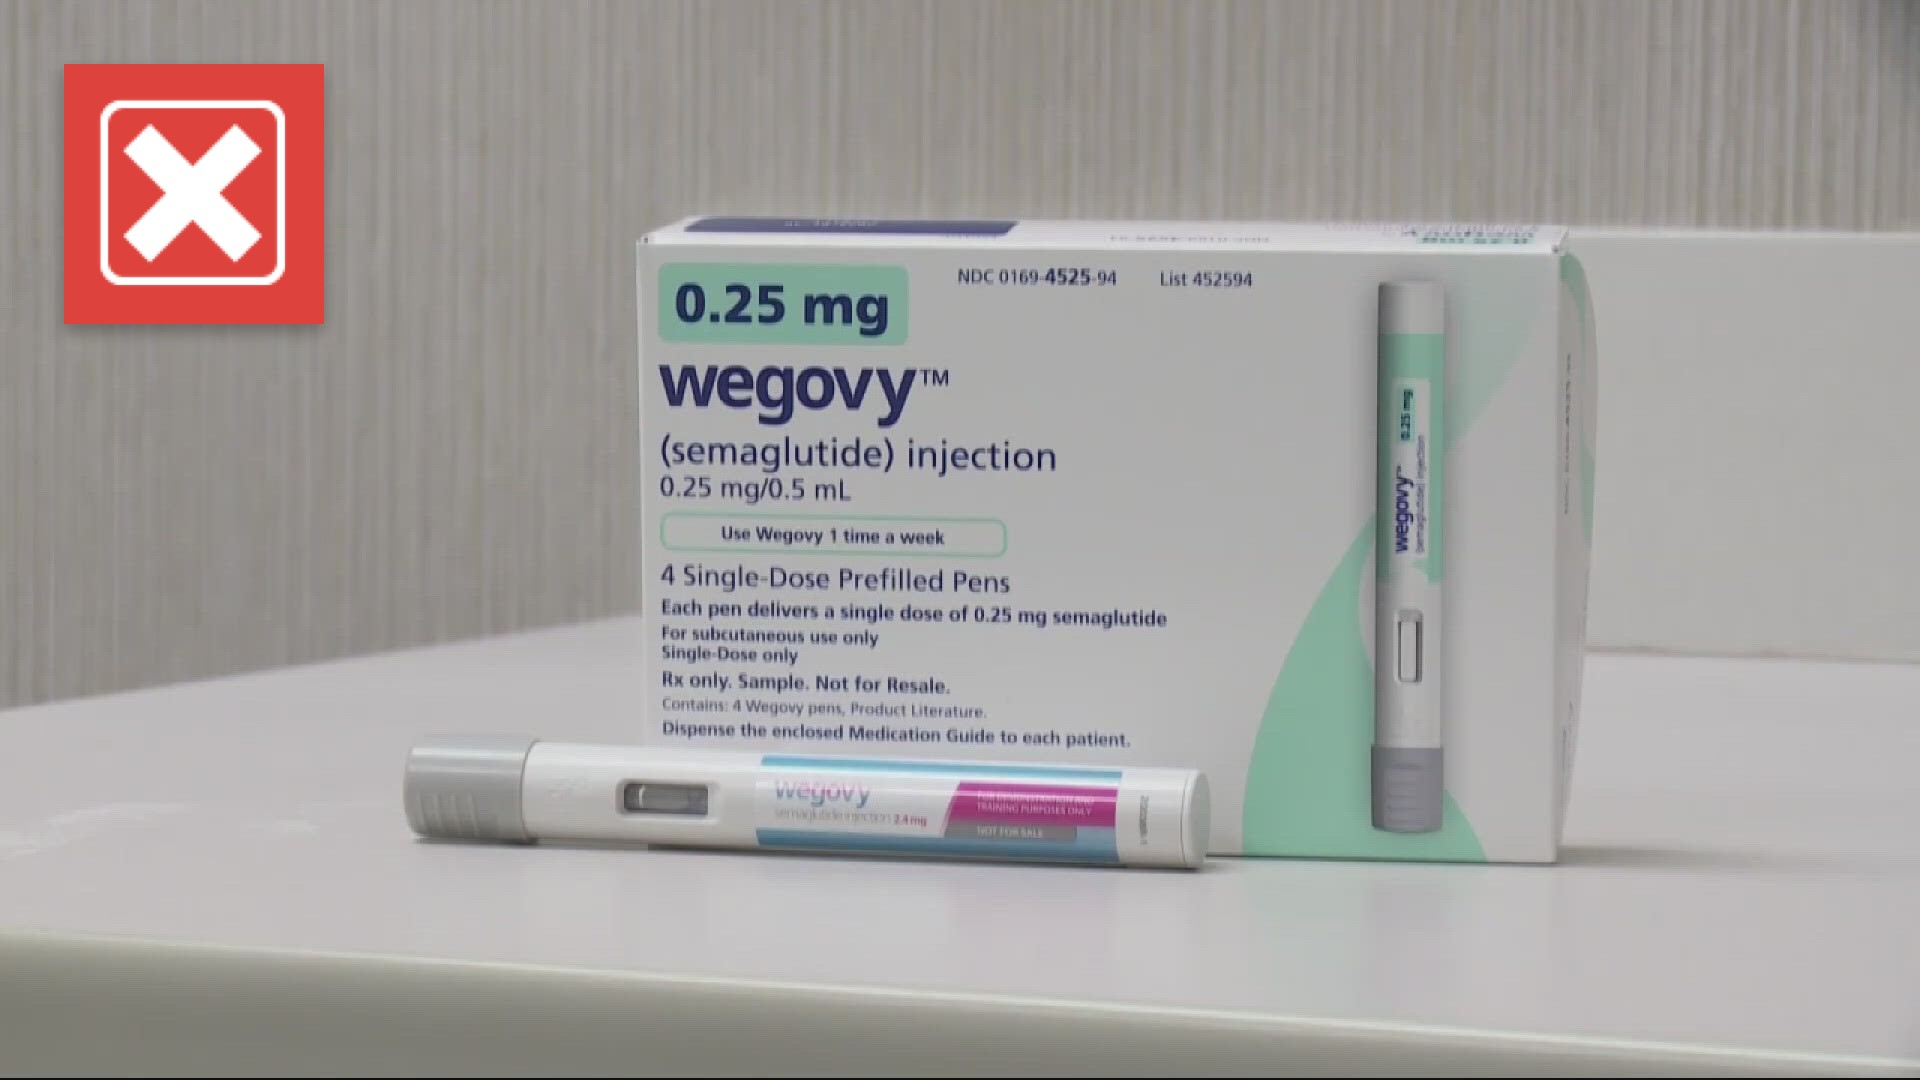 The U.S. Food and Drug Administration approved a type 2 diabetic drug, Wegovy, in 2021 for chronic weight management.